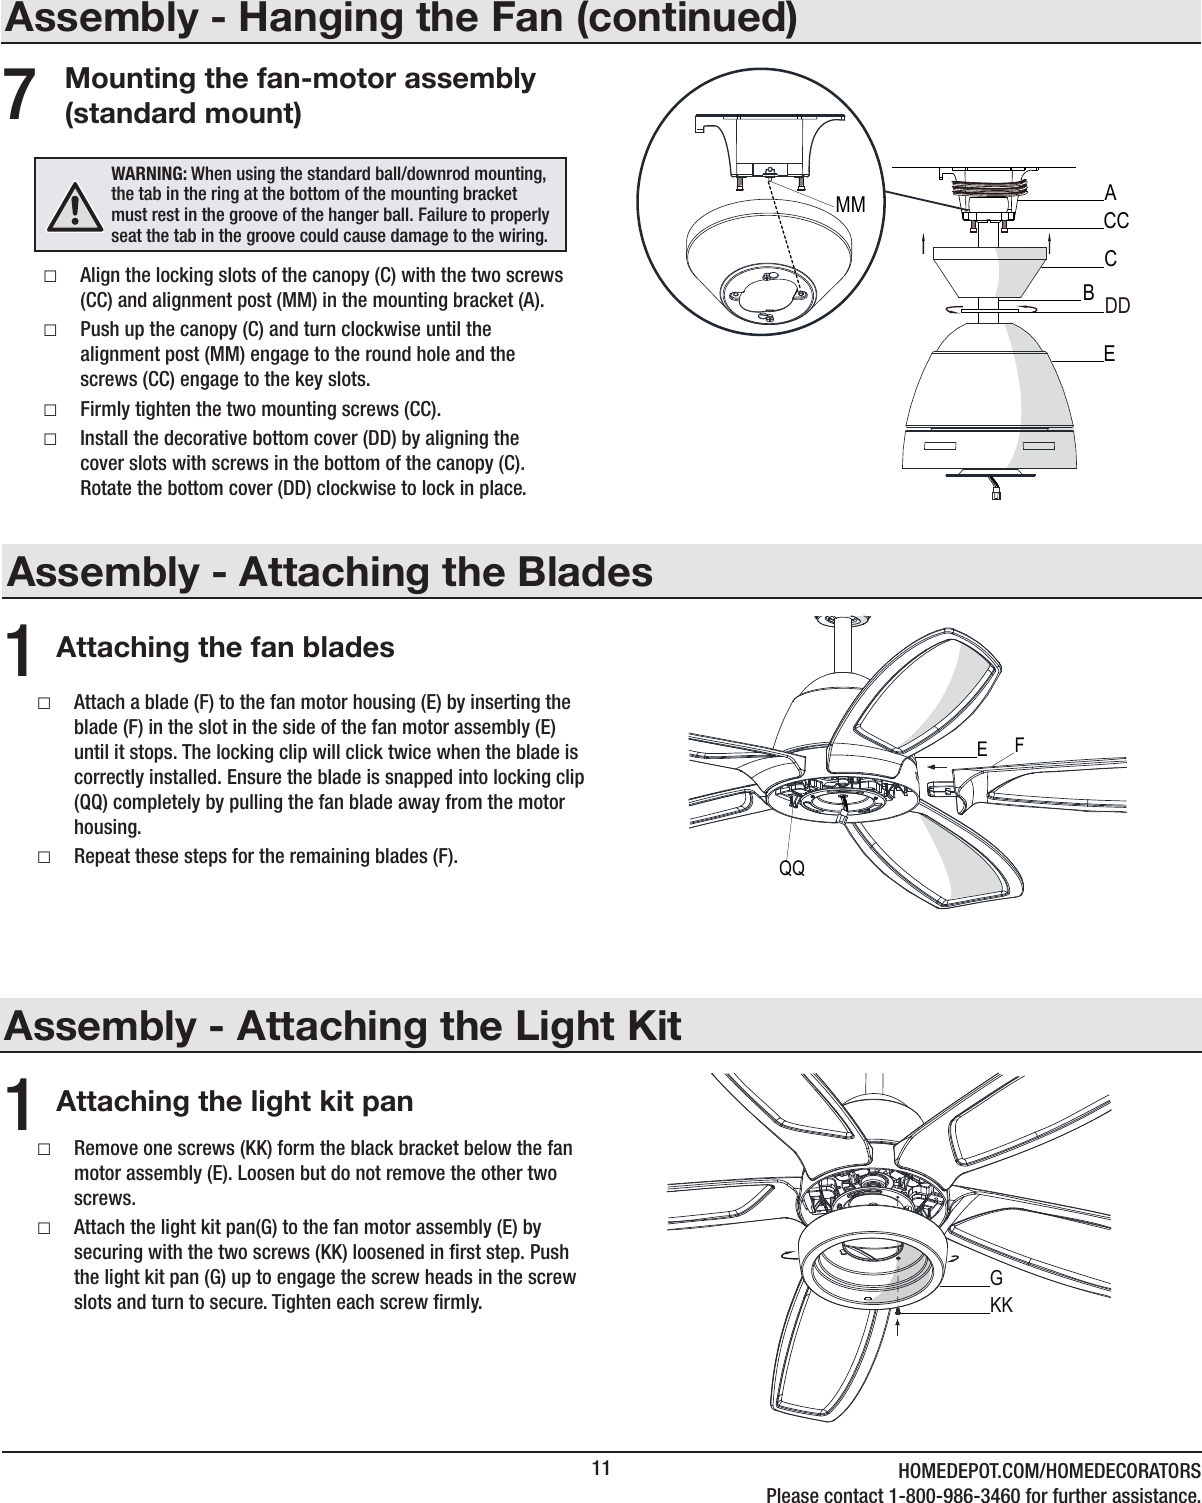 11 HOMEDEPOT.COM/HOMEDECORATORSPlease contact 1-800-986-3460 for further assistance.Assembly - Attaching the BladesAttaching the fan blades1 □Attach a blade (F) to the fan motor housing (E) by inserting the blade (F) in the slot in the side of the fan motor assembly (E) until it stops. The locking clip will click twice when the blade is correctly installed. Ensure the blade is snapped into locking clip (QQ) completely by pulling the fan blade away from the motor housing. □Repeat these steps for the remaining blades (F).Assembly - Hanging the Fan (continued)Mounting the fan-motor assembly (standard mount) □Align the locking slots of the canopy (C) with the two screws (CC) and alignment post (MM) in the mounting bracket (A). □Push up the canopy (C) and turn clockwise until the alignment post (MM) engage to the round hole and the screws (CC) engage to the key slots. □Firmly tighten the two mounting screws (CC). □Install the decorative bottom cover (DD) by aligning the cover slots with screws in the bottom of the canopy (C). Rotate the bottom cover (DD) clockwise to lock in place.7WARNING: When using the standard ball/downrod mounting, the tab in the ring at the bottom of the mounting bracket must rest in the groove of the hanger ball. Failure to properly seat the tab in the groove could cause damage to the wiring.CACCDDBEMMFEQQAssembly - Attaching the Light Kit □Remove one screws (KK) form the black bracket below the fan motor assembly (E). Loosen but do not remove the other two screws. □Attach the light kit pan(G) to the fan motor assembly (E) by securing with the two screws (KK) loosened in rst step. Push the light kit pan (G) up to engage the screw heads in the screw slots and turn to secure. Tighten each screw rmly.Attaching the light kit pan1KKG